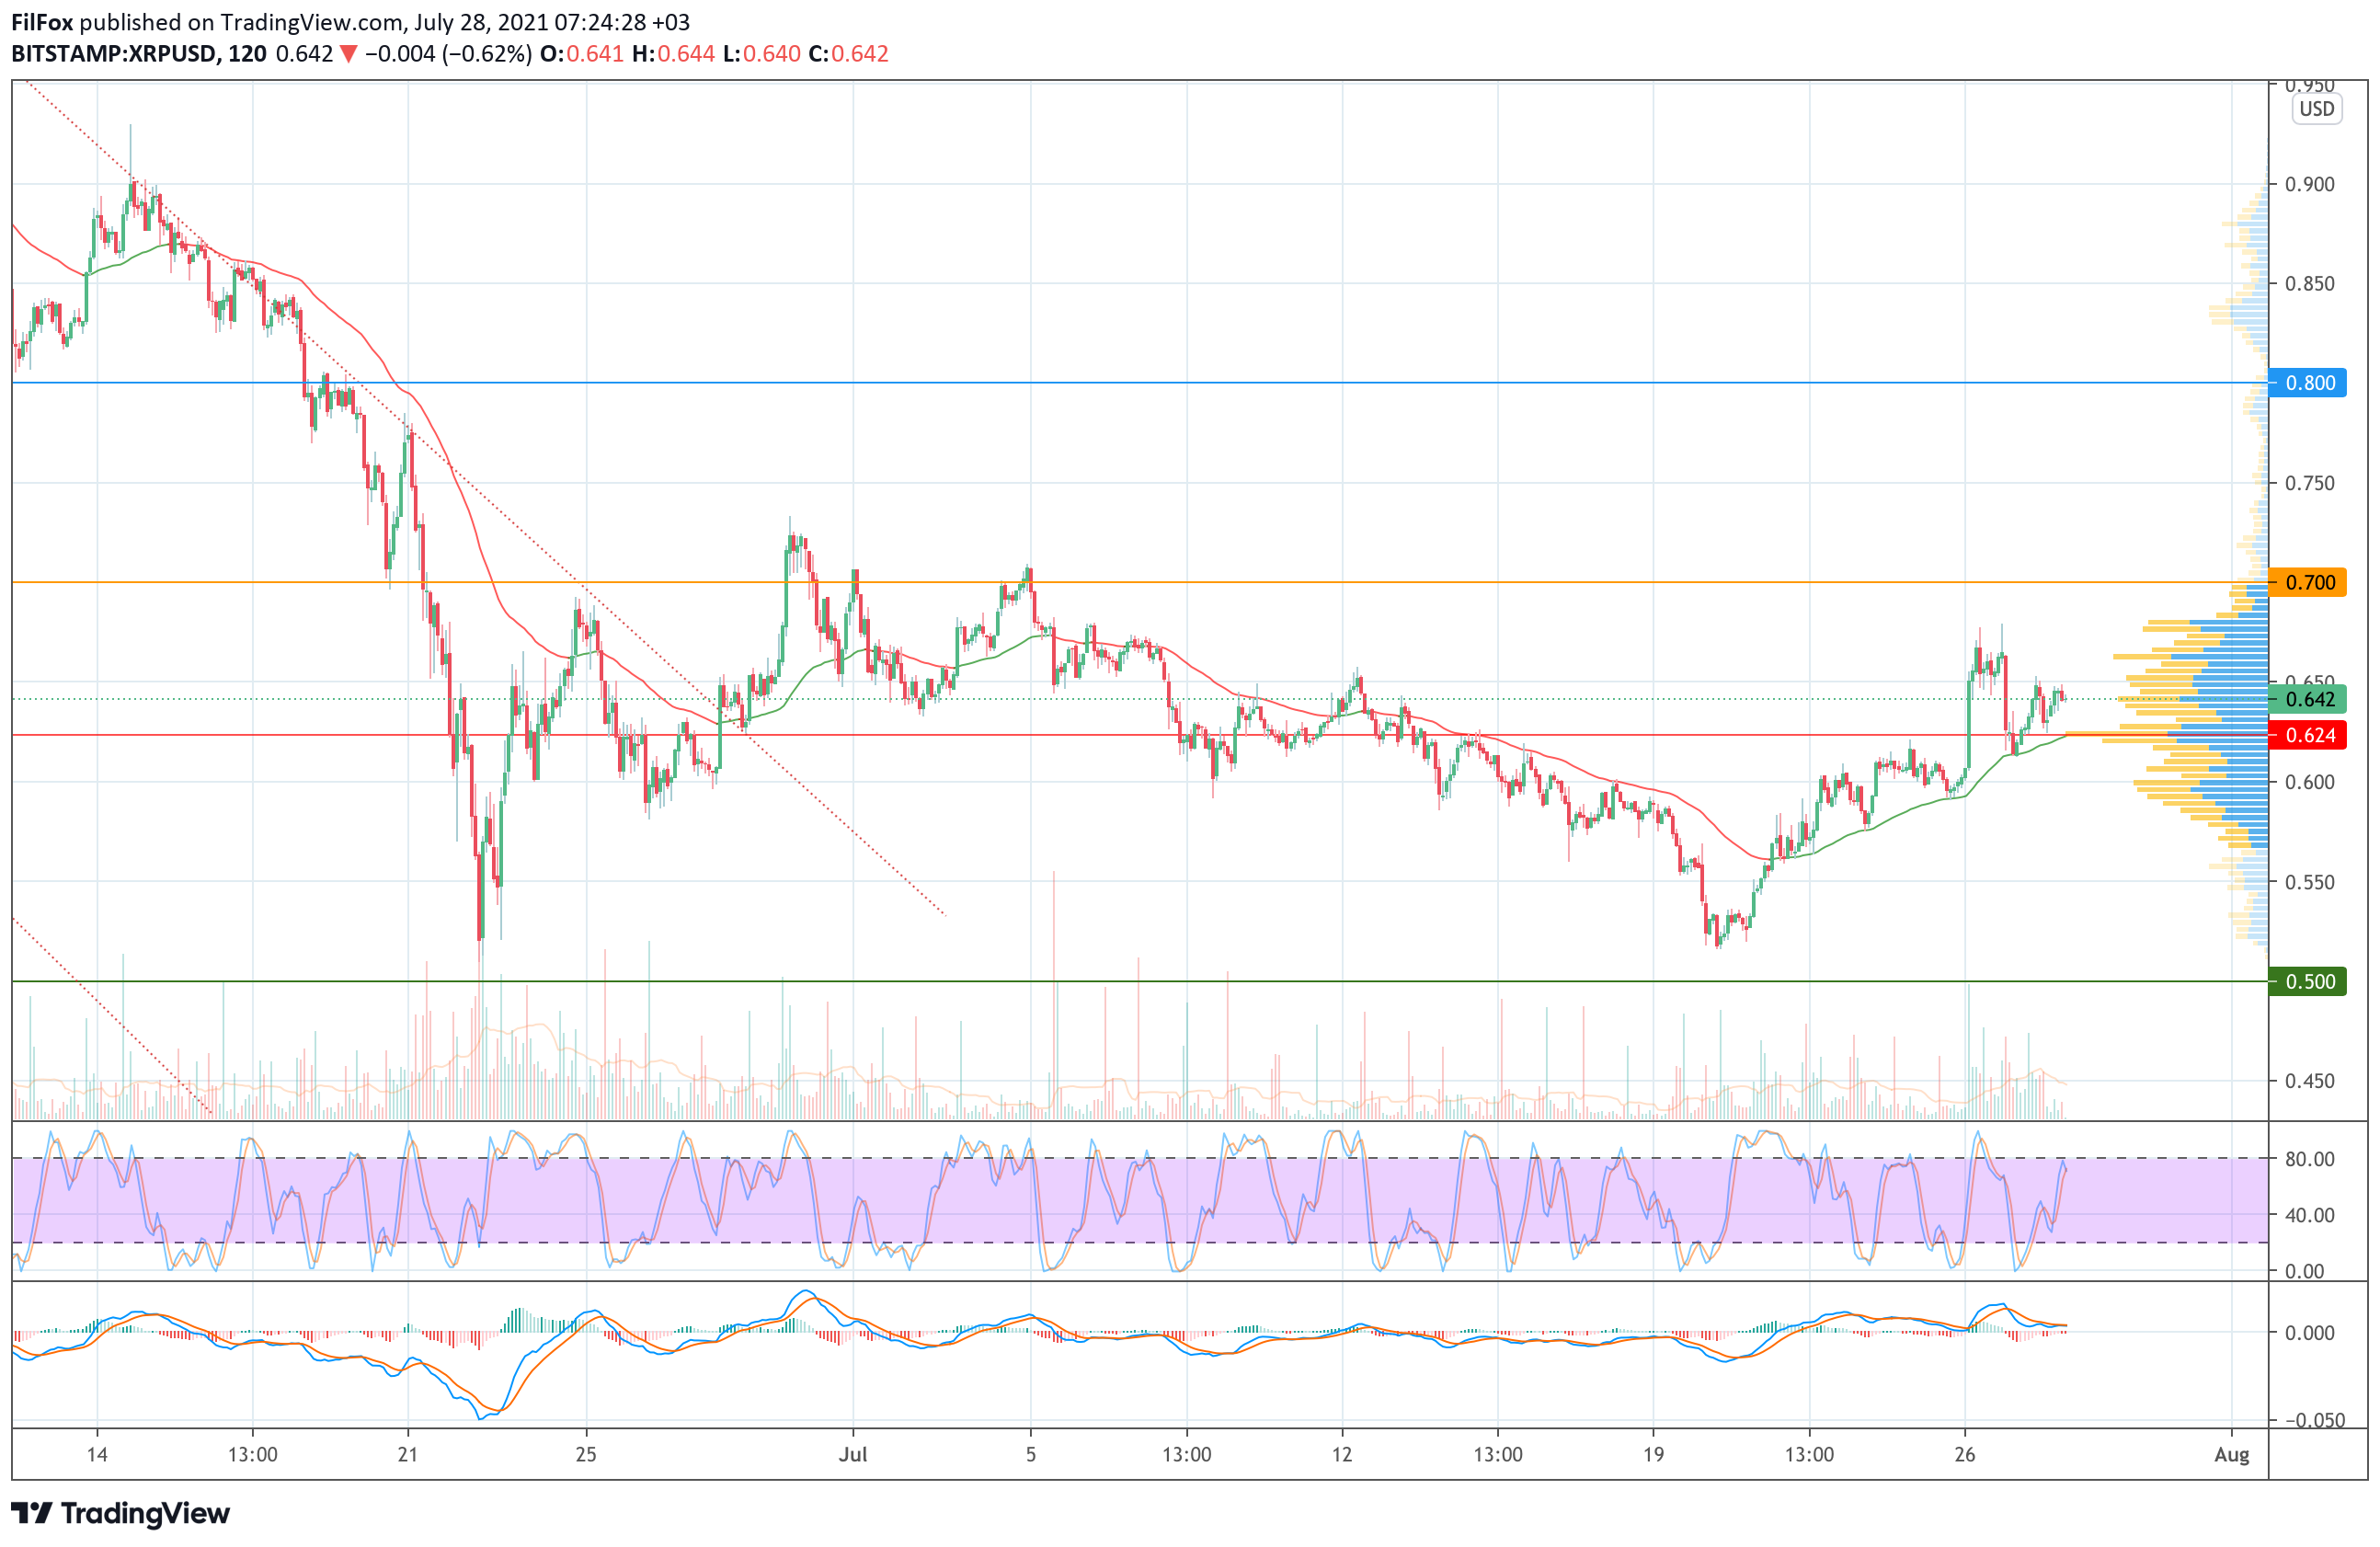 Analysis of the prices of Bitcoin, Ethereum, XRP for 07/28/2021